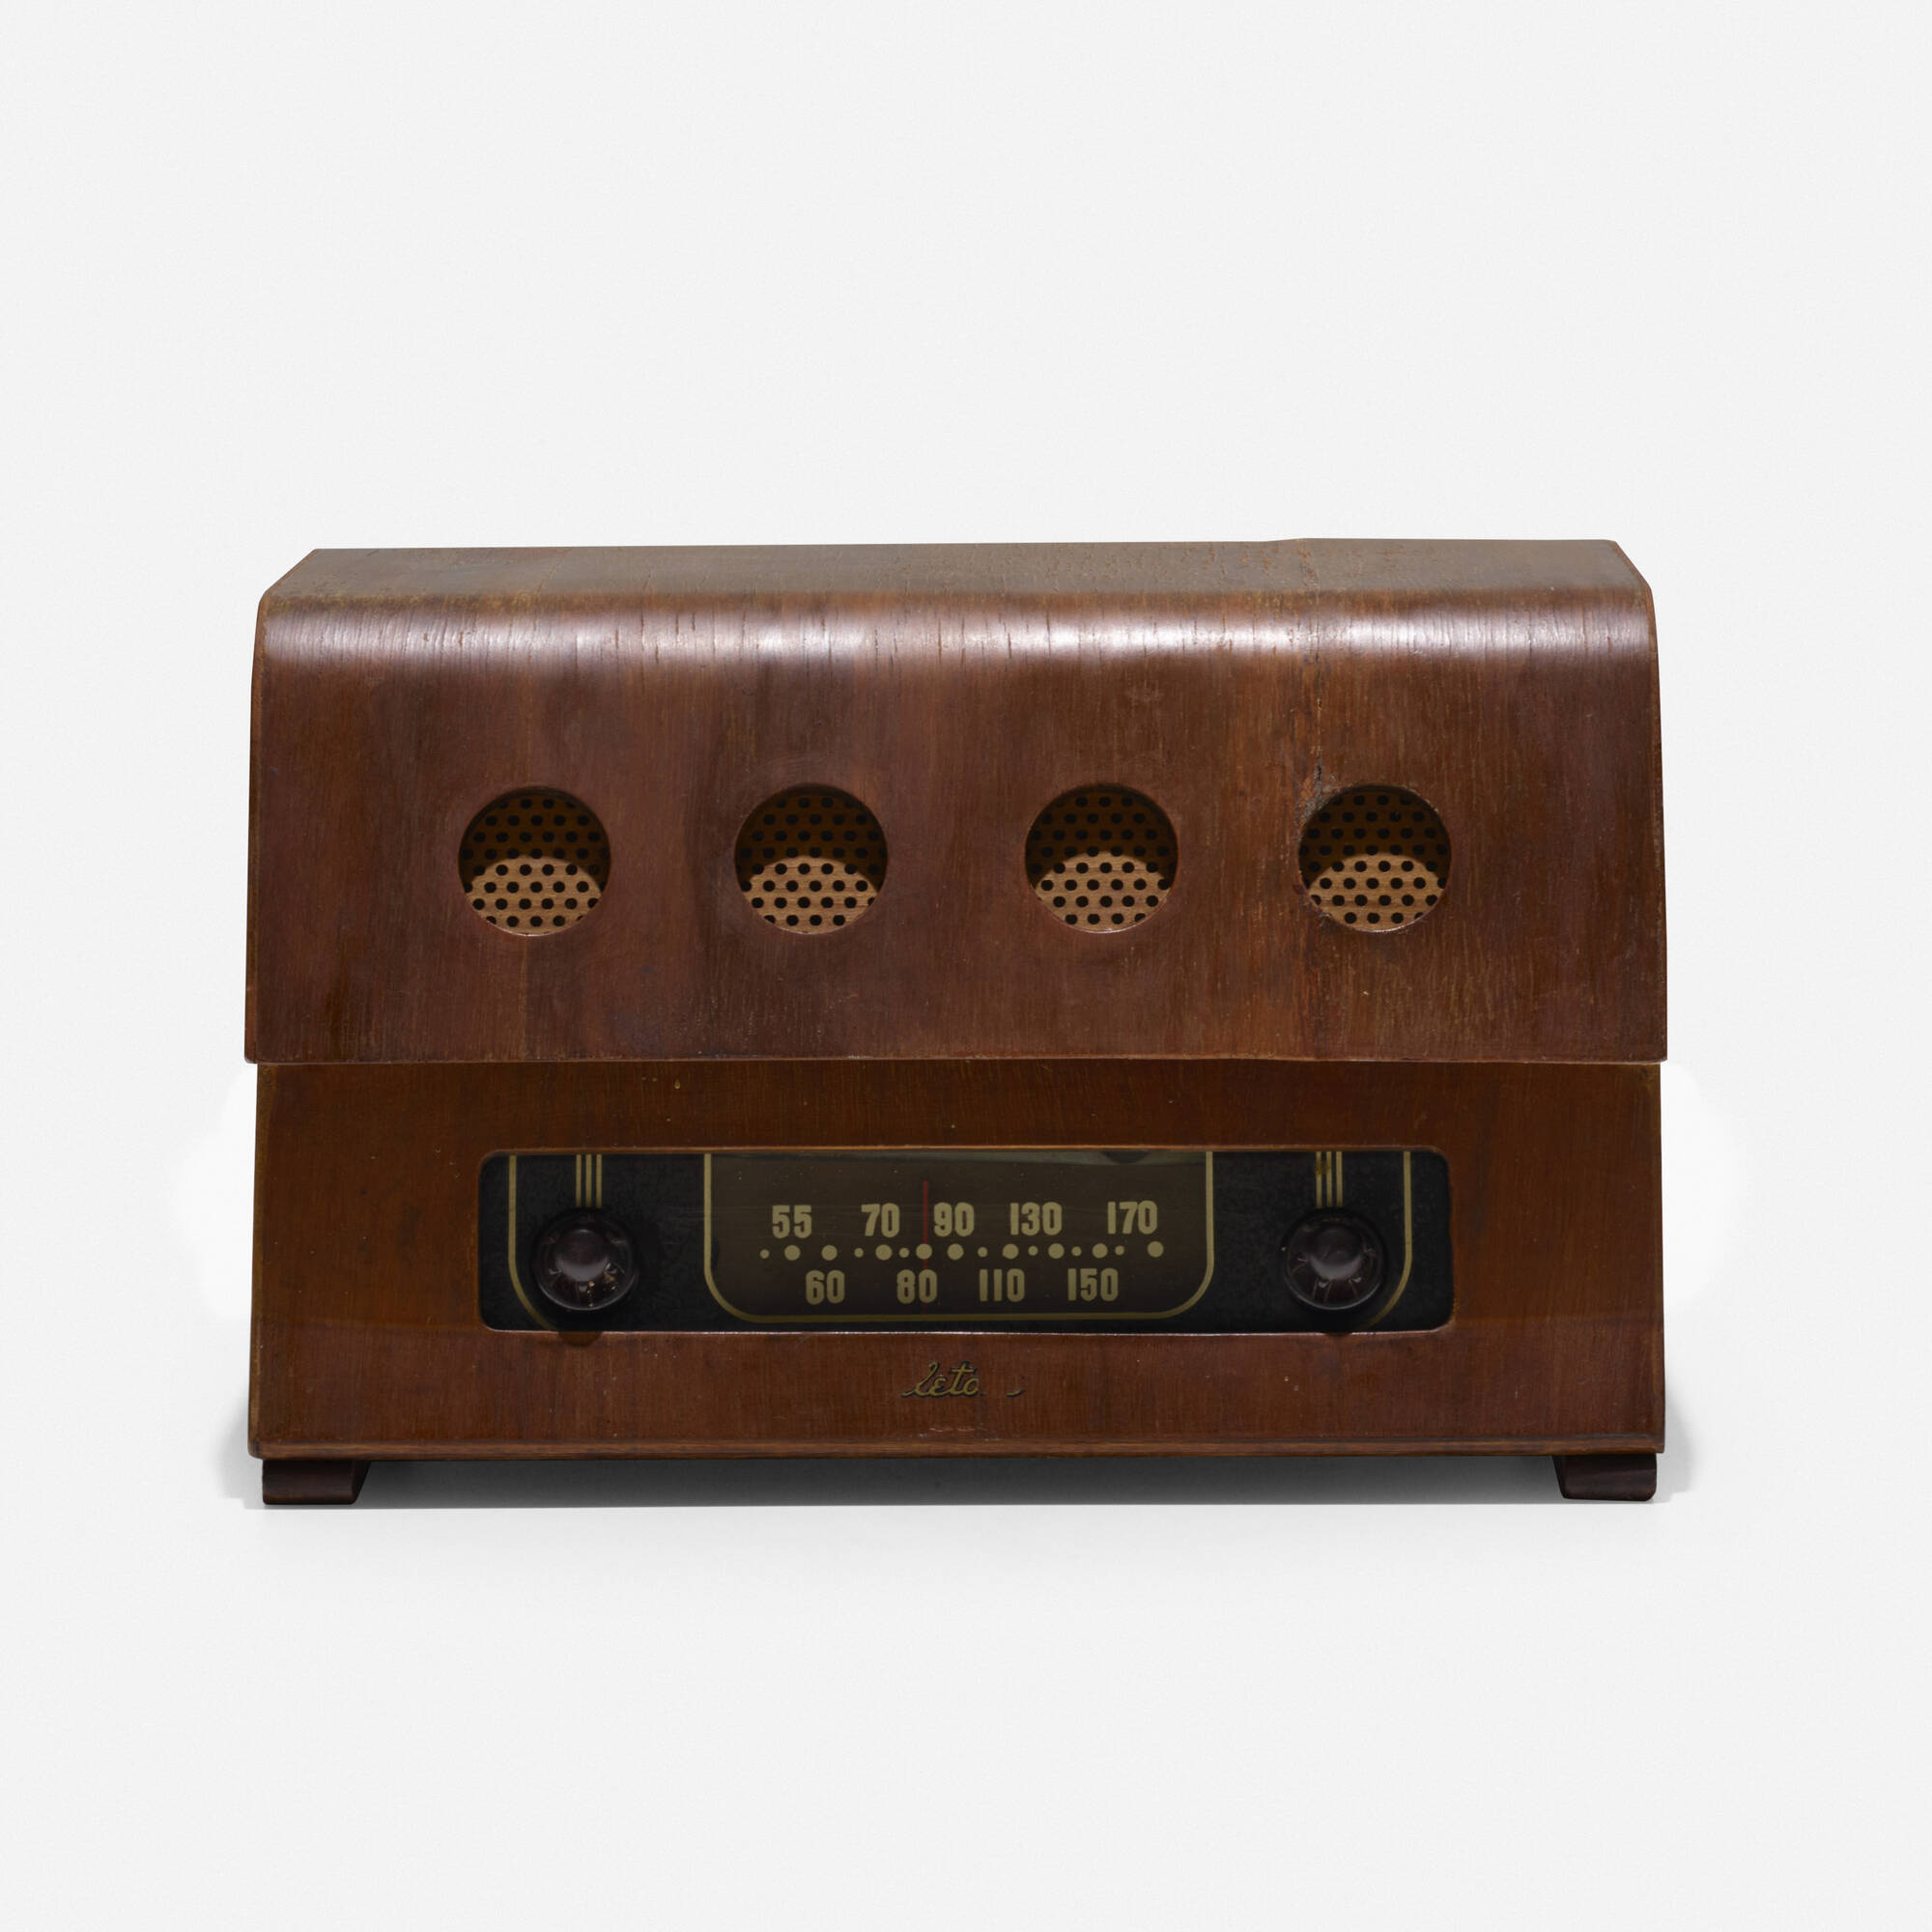 400: CHARLES AND RAY EAMES, radio < American Design, 12 September 2019 <  Auctions | Wright: Auctions of Art and Design